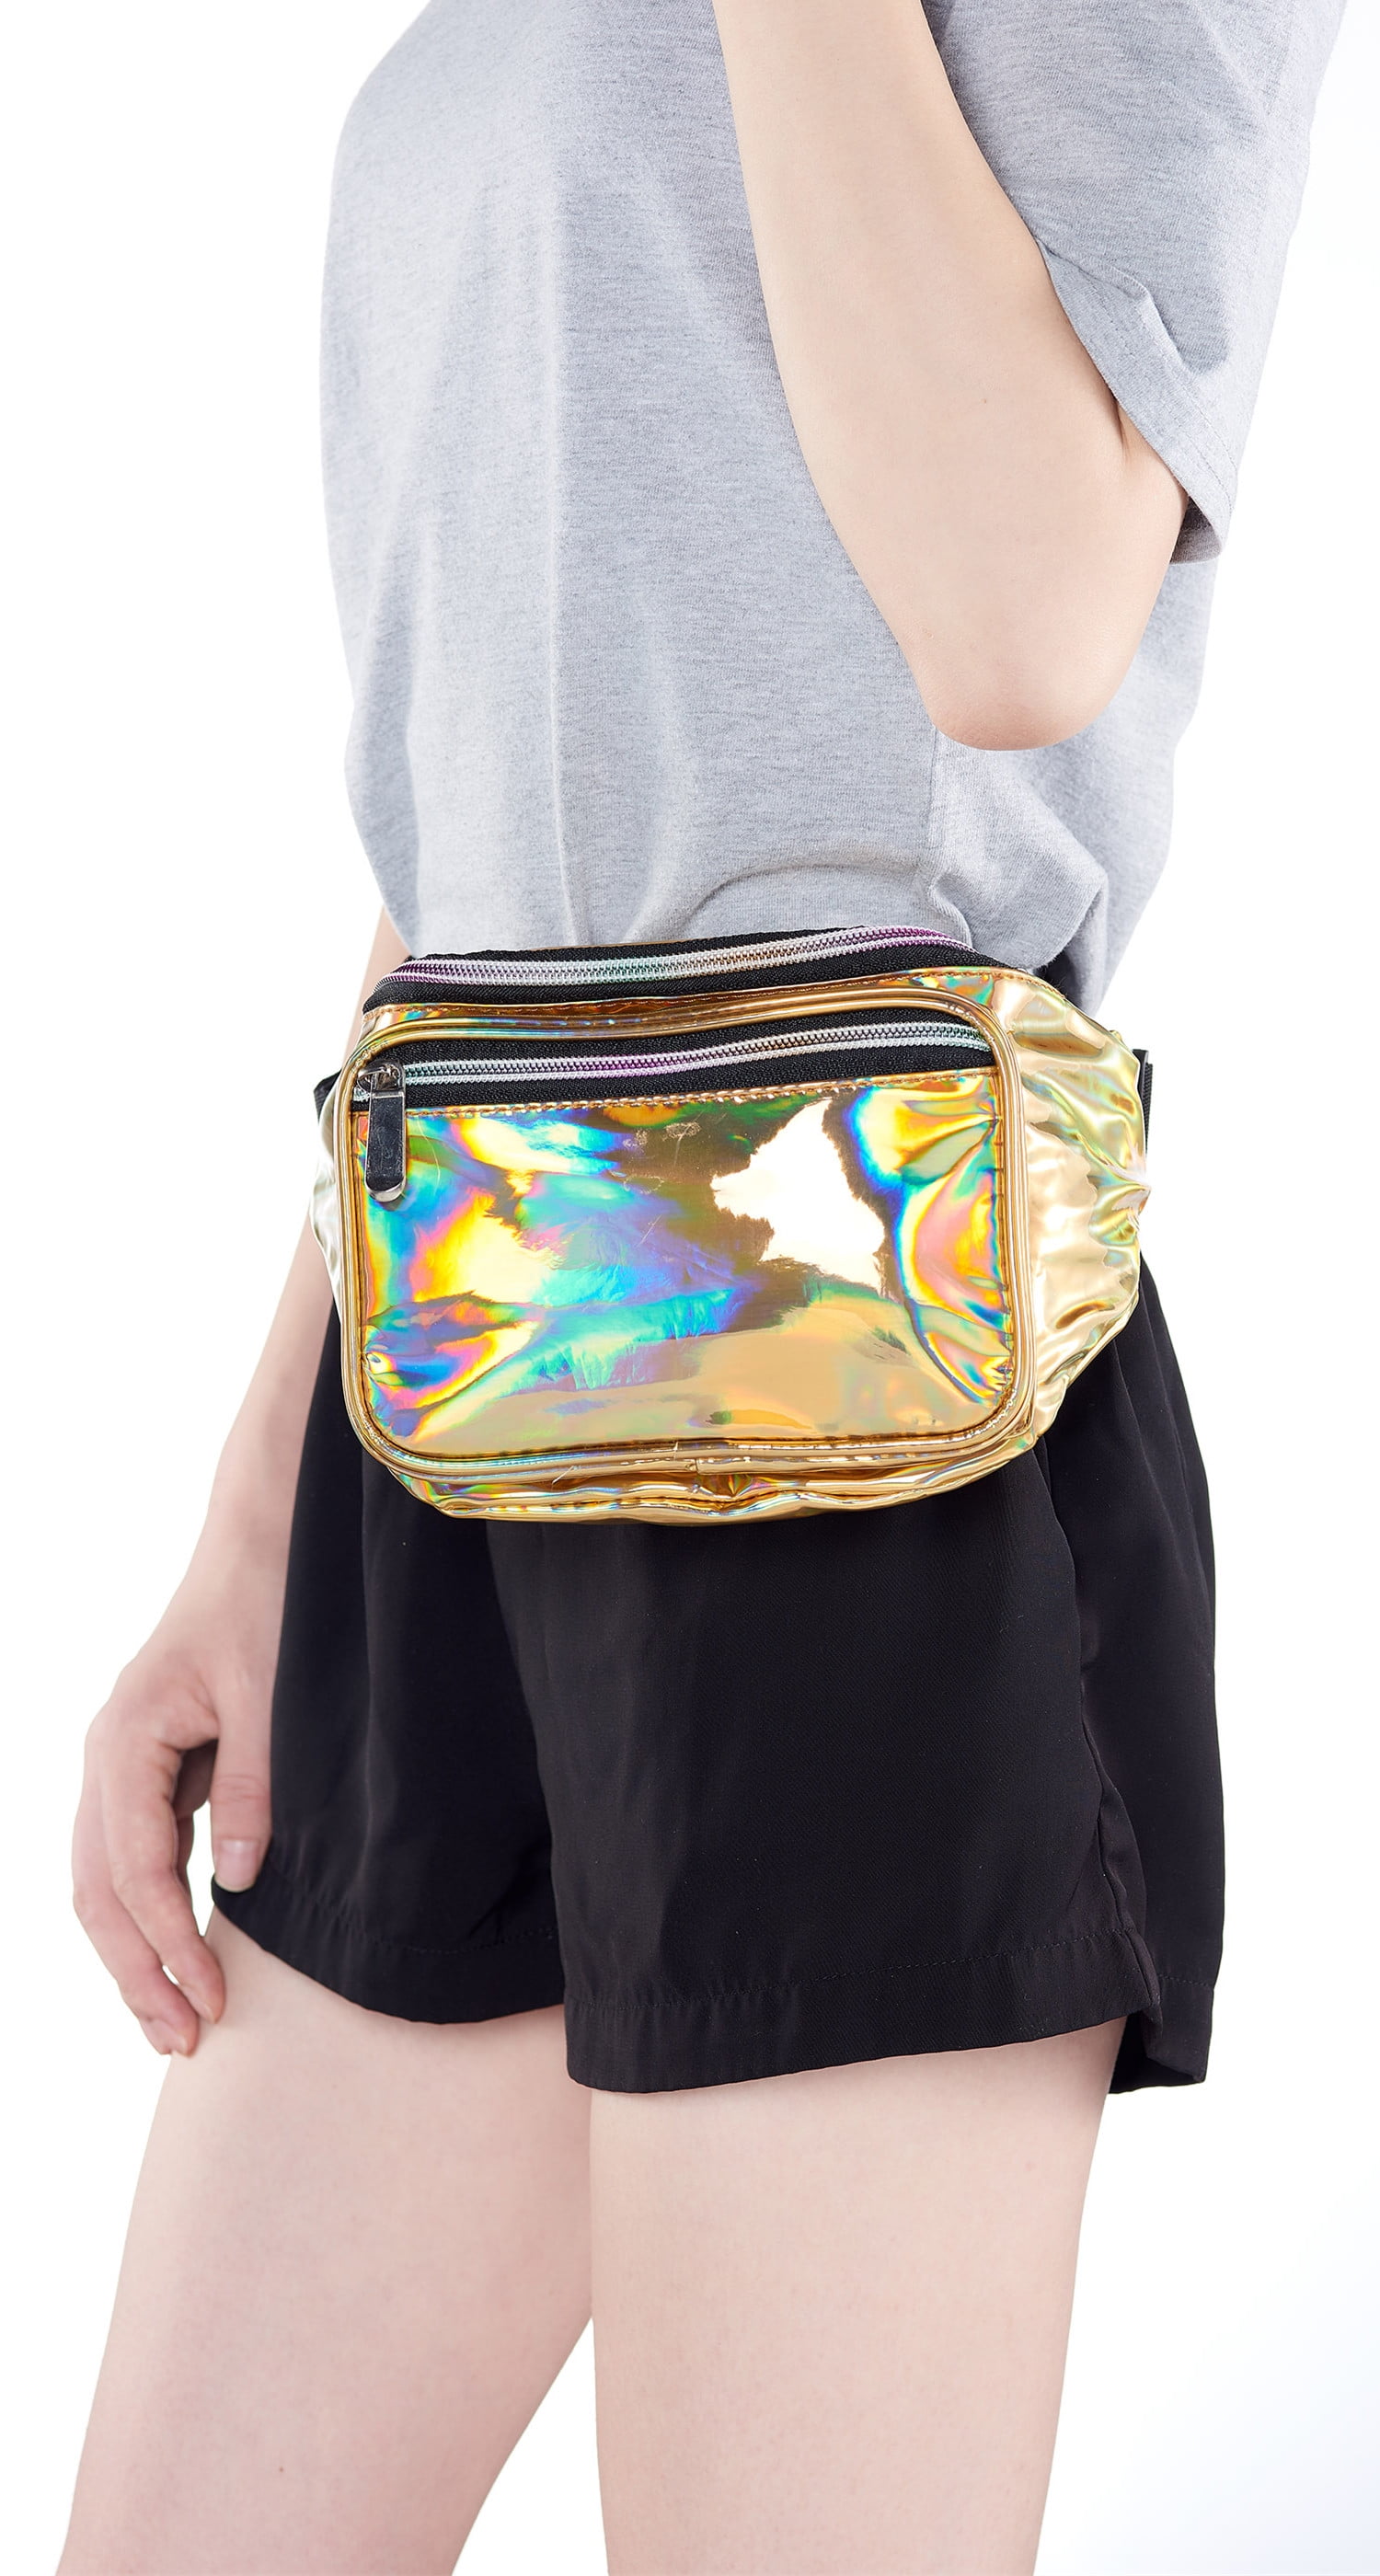  Holographic 80s 90S Rave Transparent Diamonds Fanny Pack for  festival women, Girl Cute Fashion Waist Bag Belt Bags-Transparent Diamonds